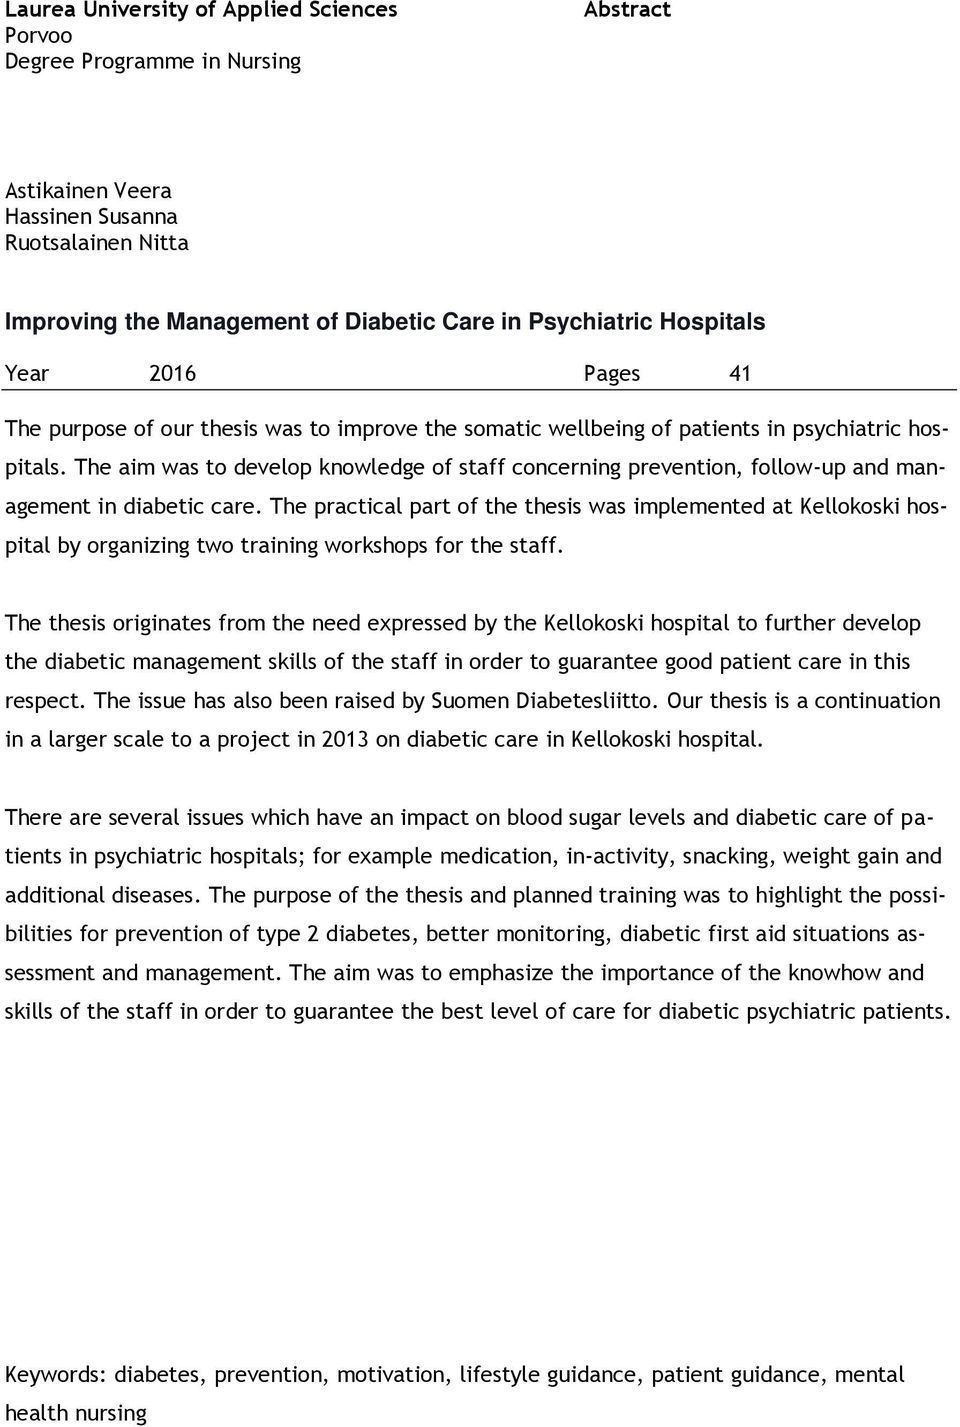 The aim was to develop knowledge of staff concerning prevention, follow-up and management in diabetic care.